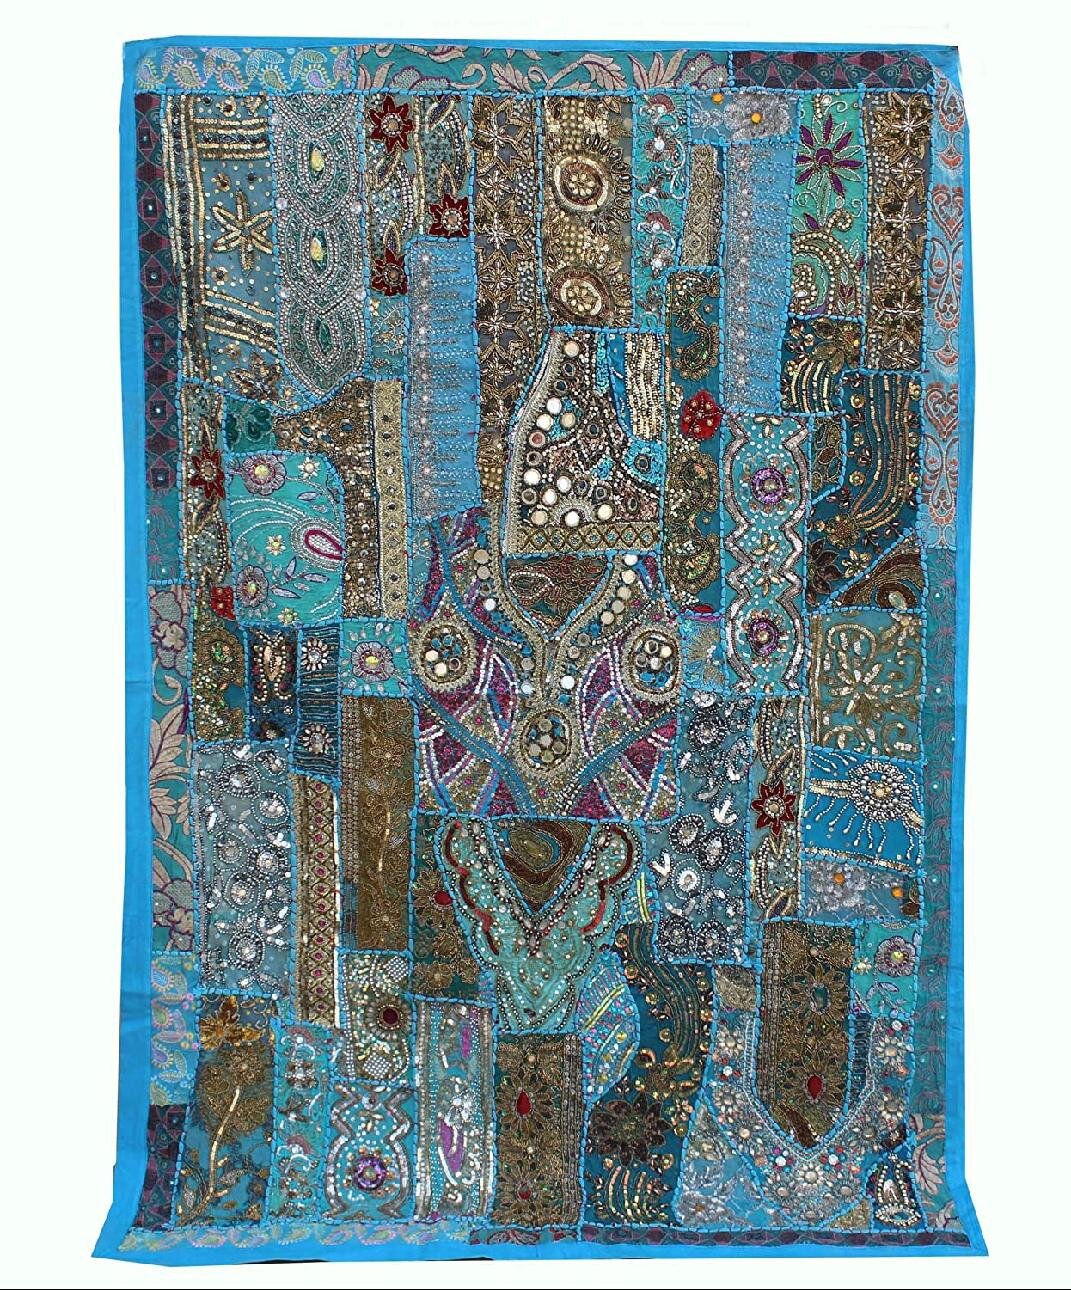 Indian Beaded Wall Hanging Patchwork Embroidered Bohemian Wall Decor Tapestry